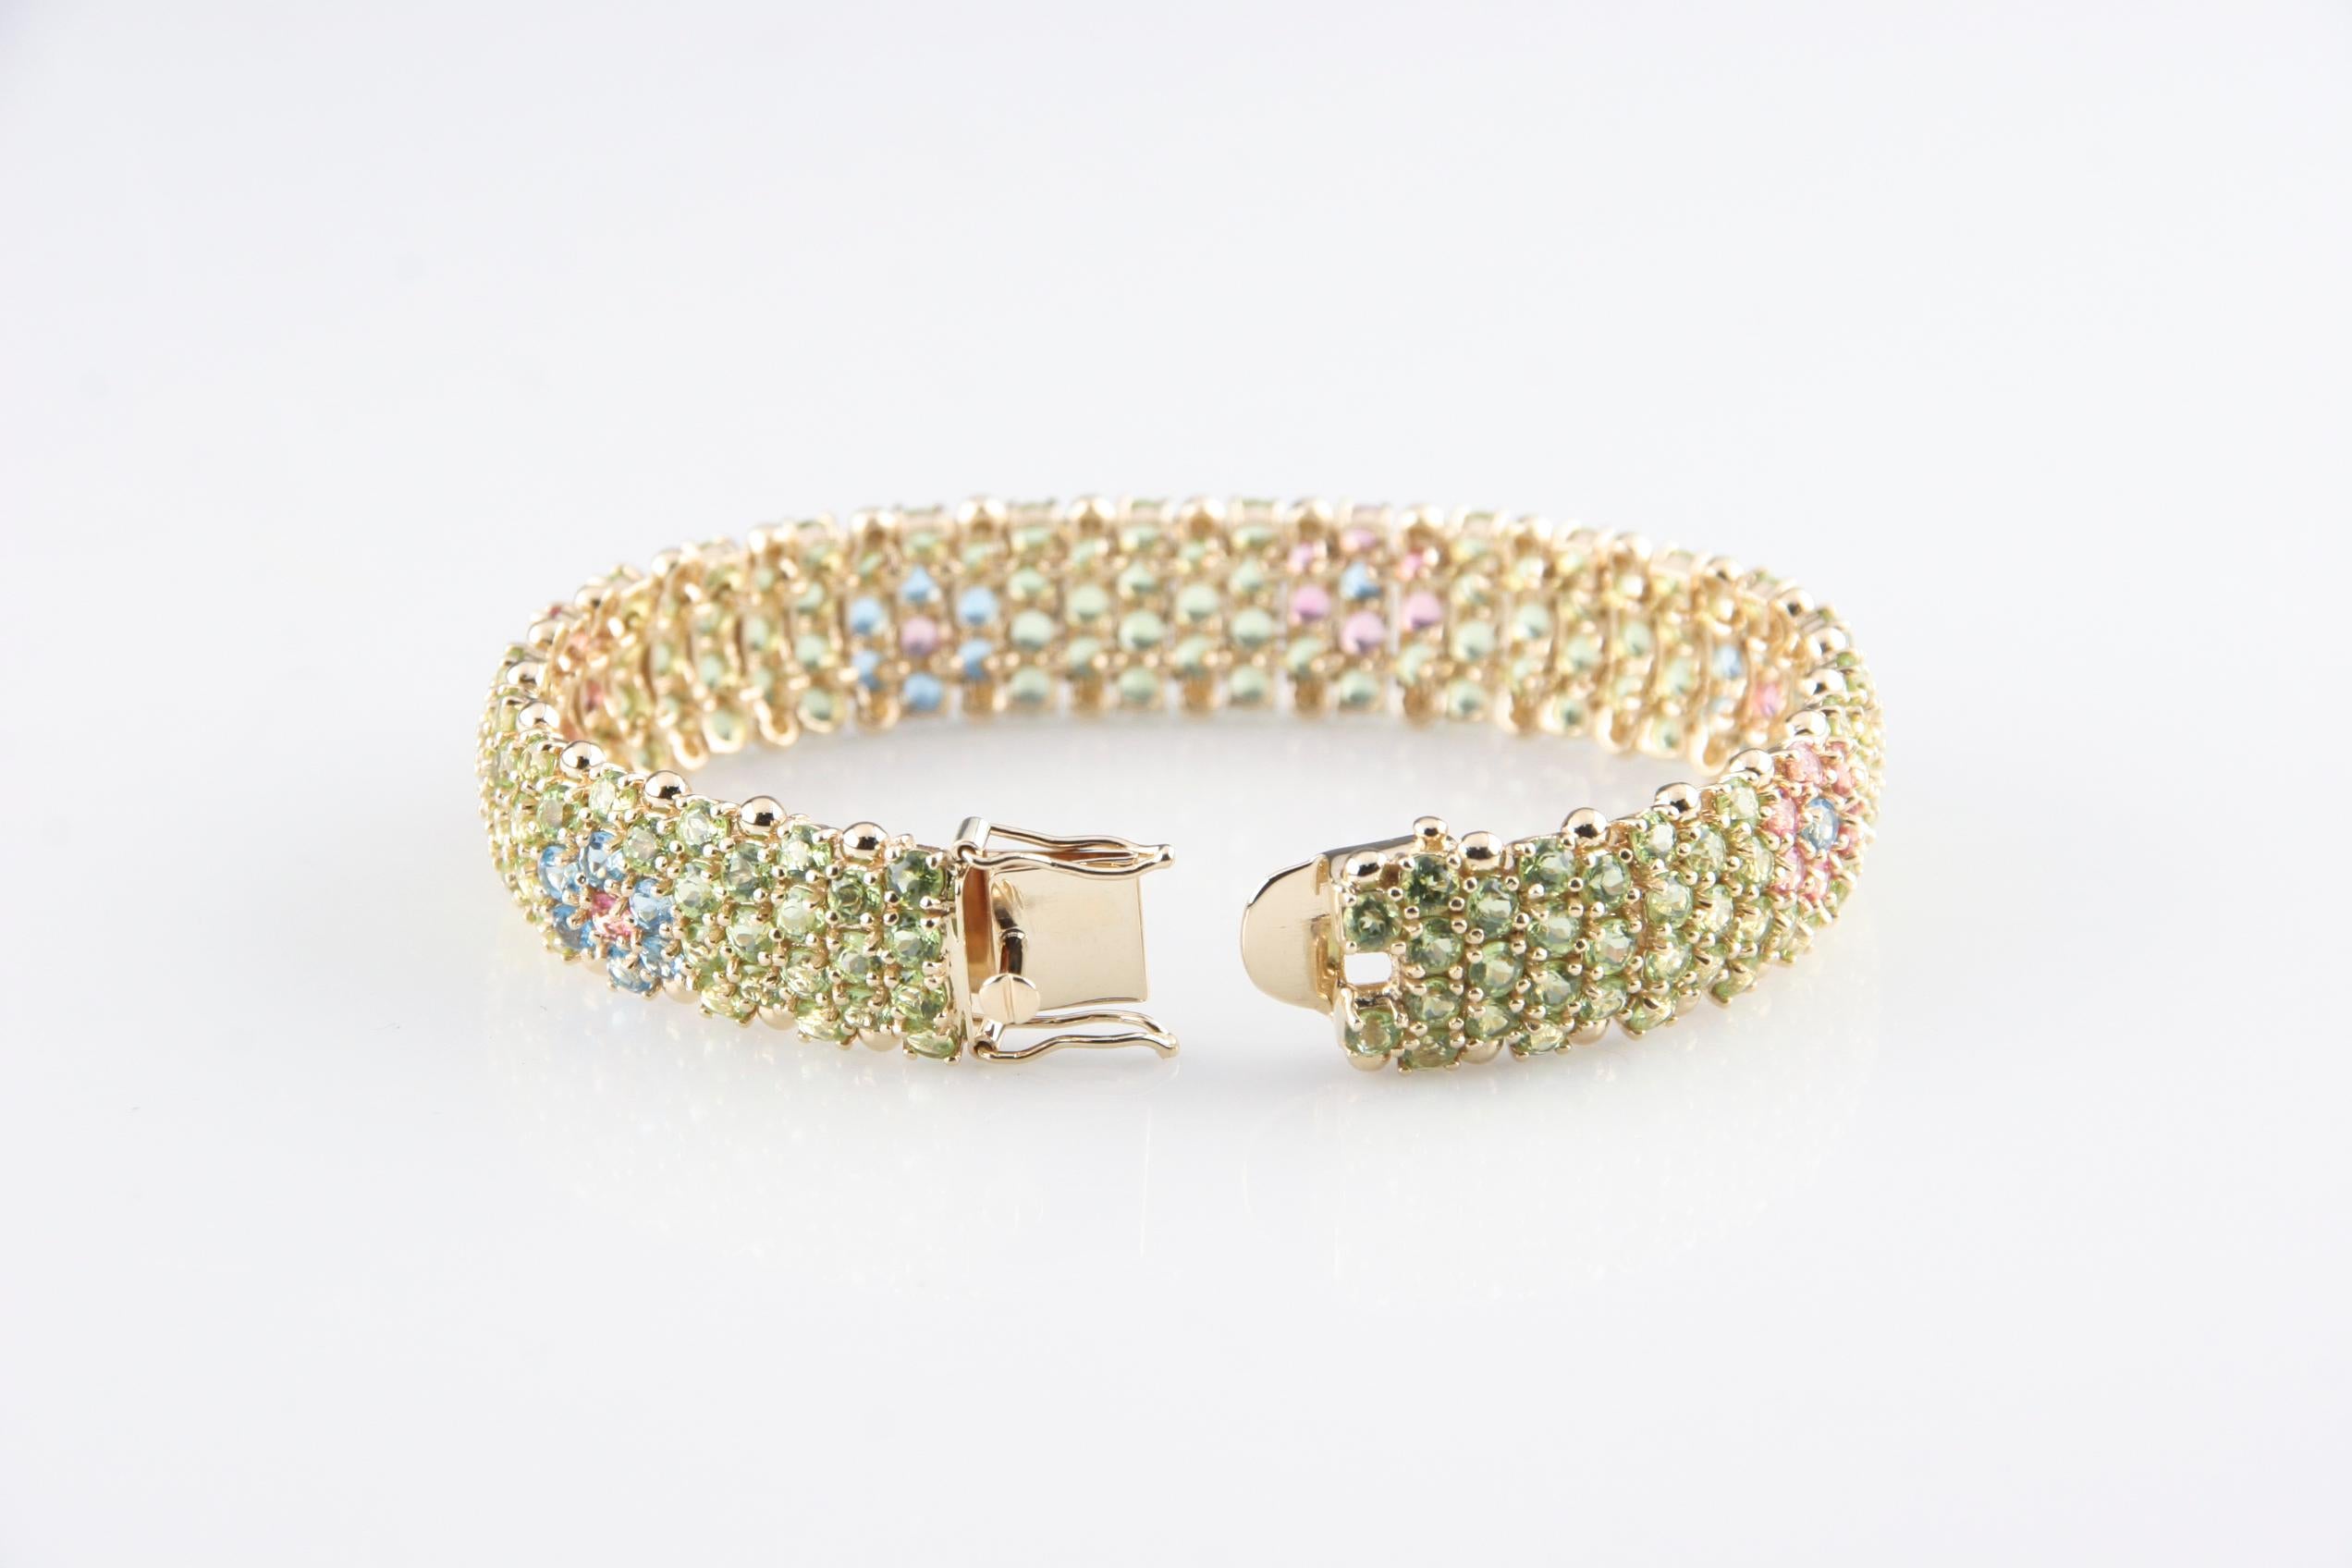 Gorgeous 14k Yellow Gold Gemstone Bracelet
Features Rows of Three or Four Round Brilliant Gemstones that Create a Unique Floral Design
Features Greenish Yellow Quartzes, Pink Tourmaline, and Blue Topaz
Total Length = 7